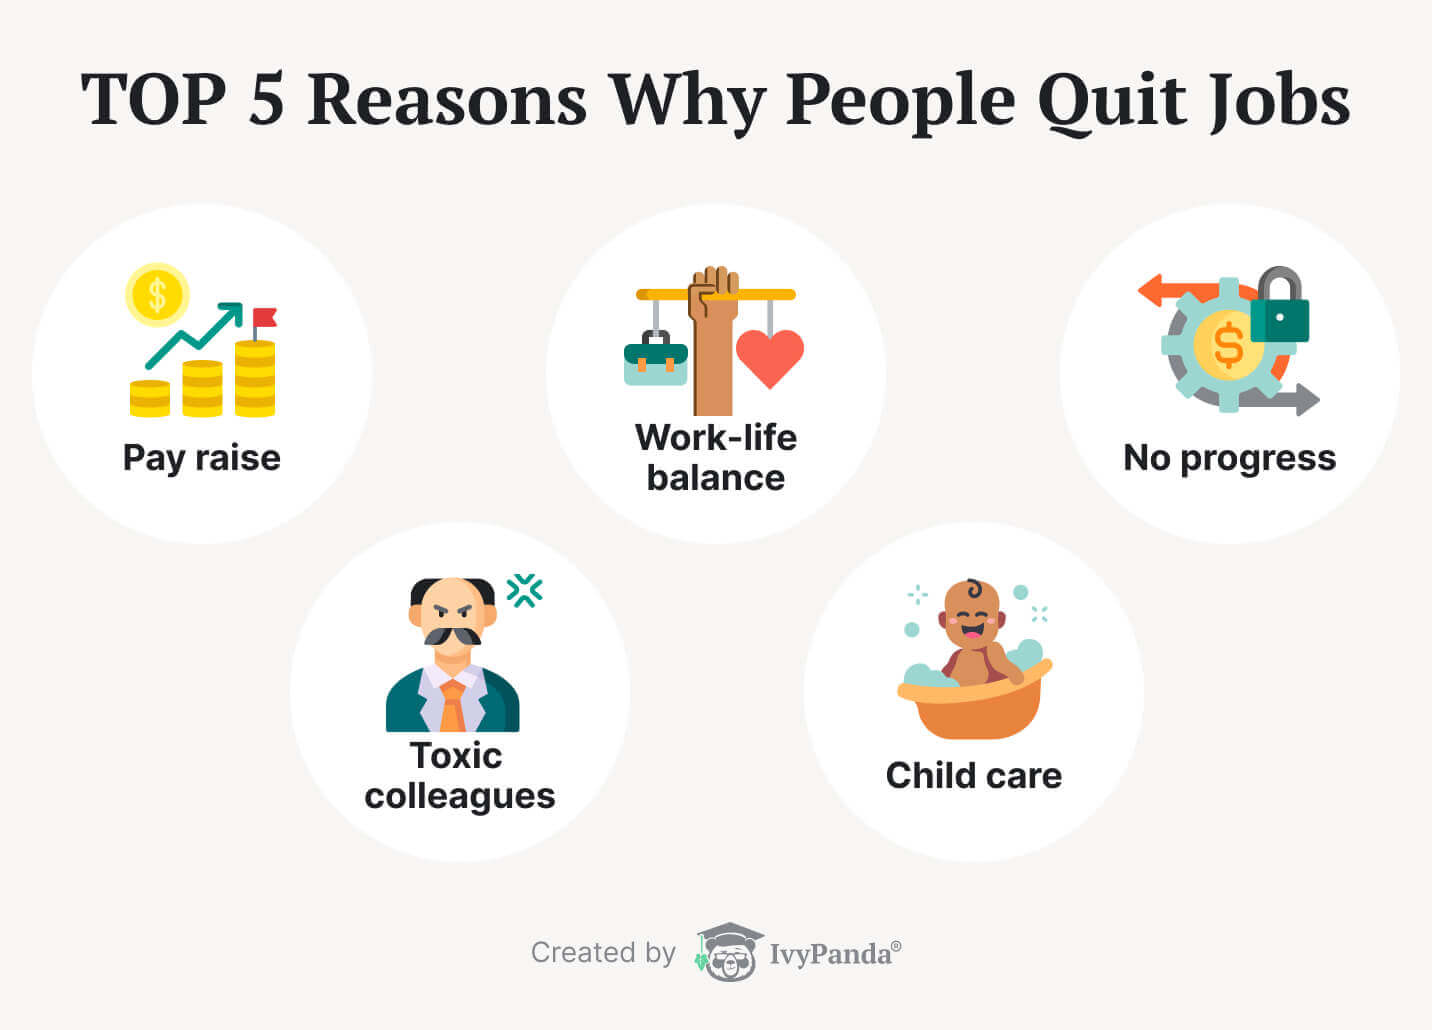 The image shows the most popular reasons for people quitting their jobs.